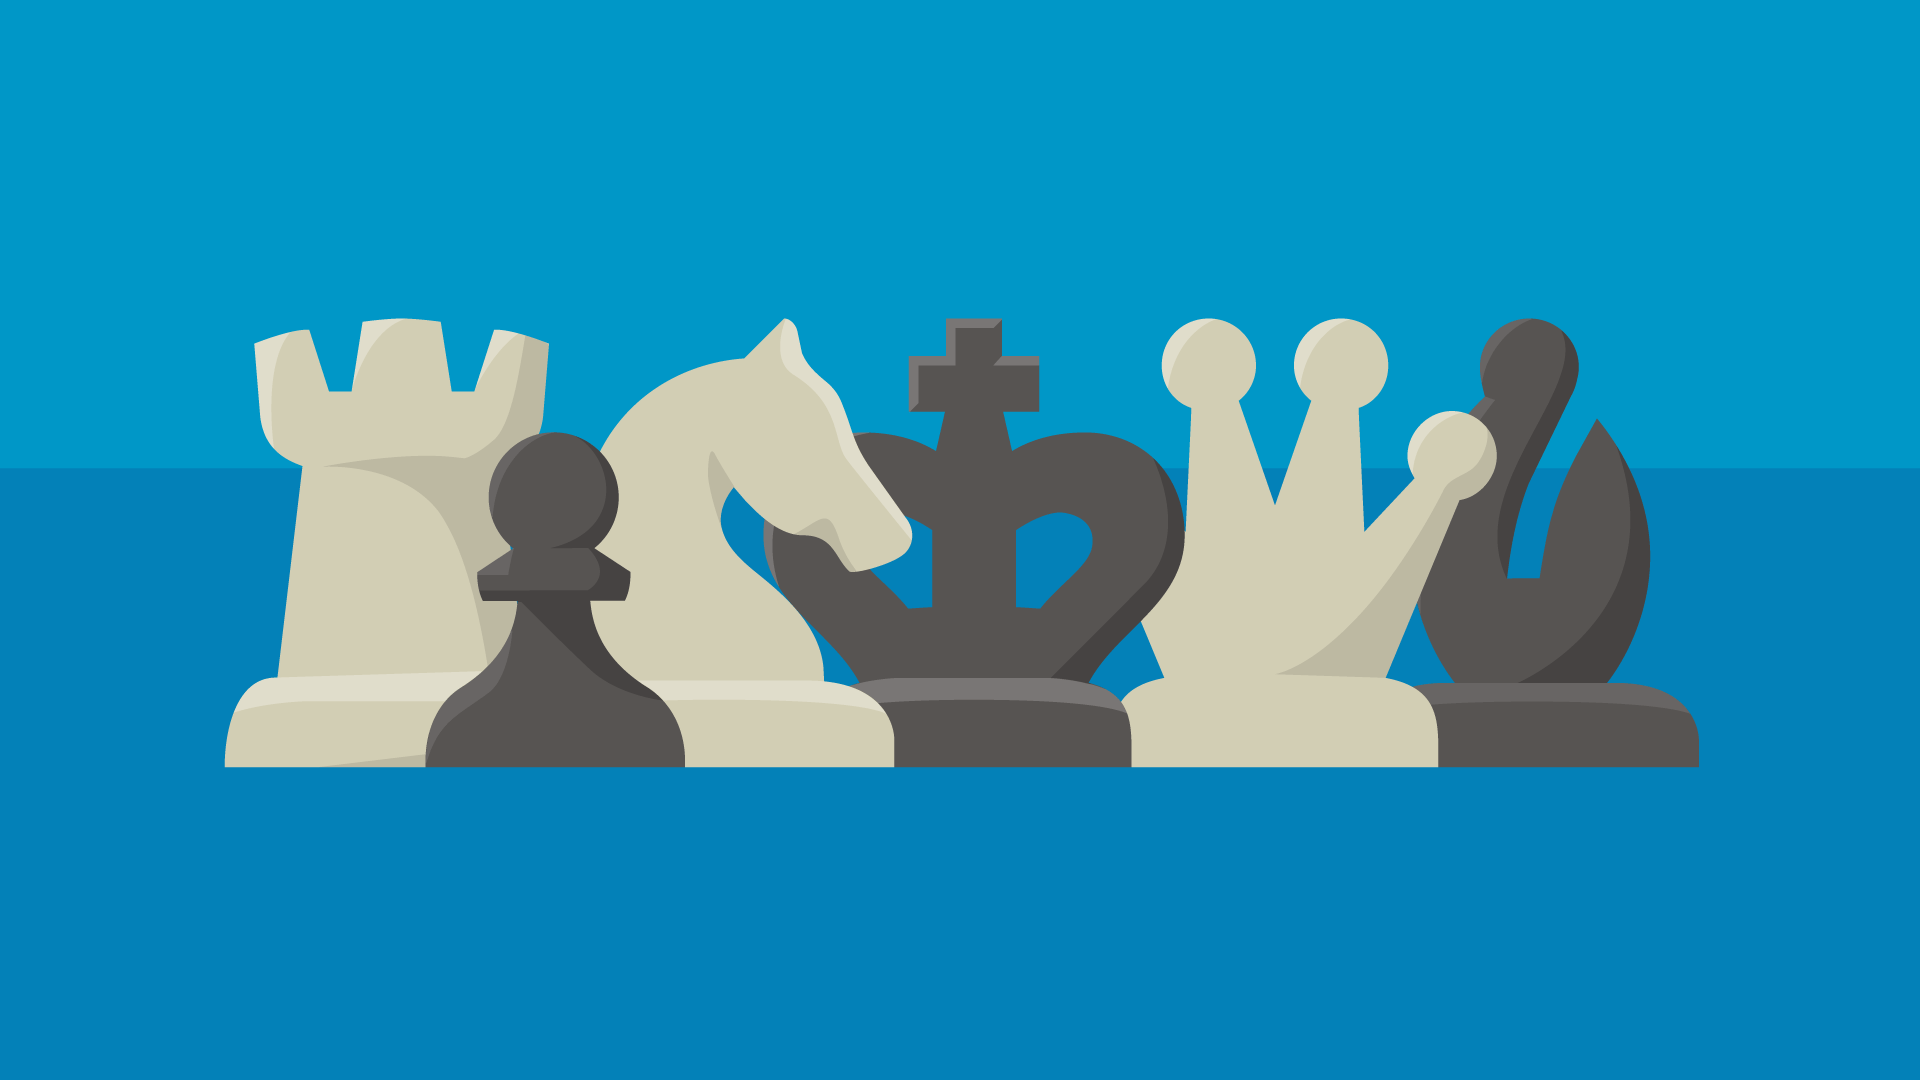 pictures of chess pieces